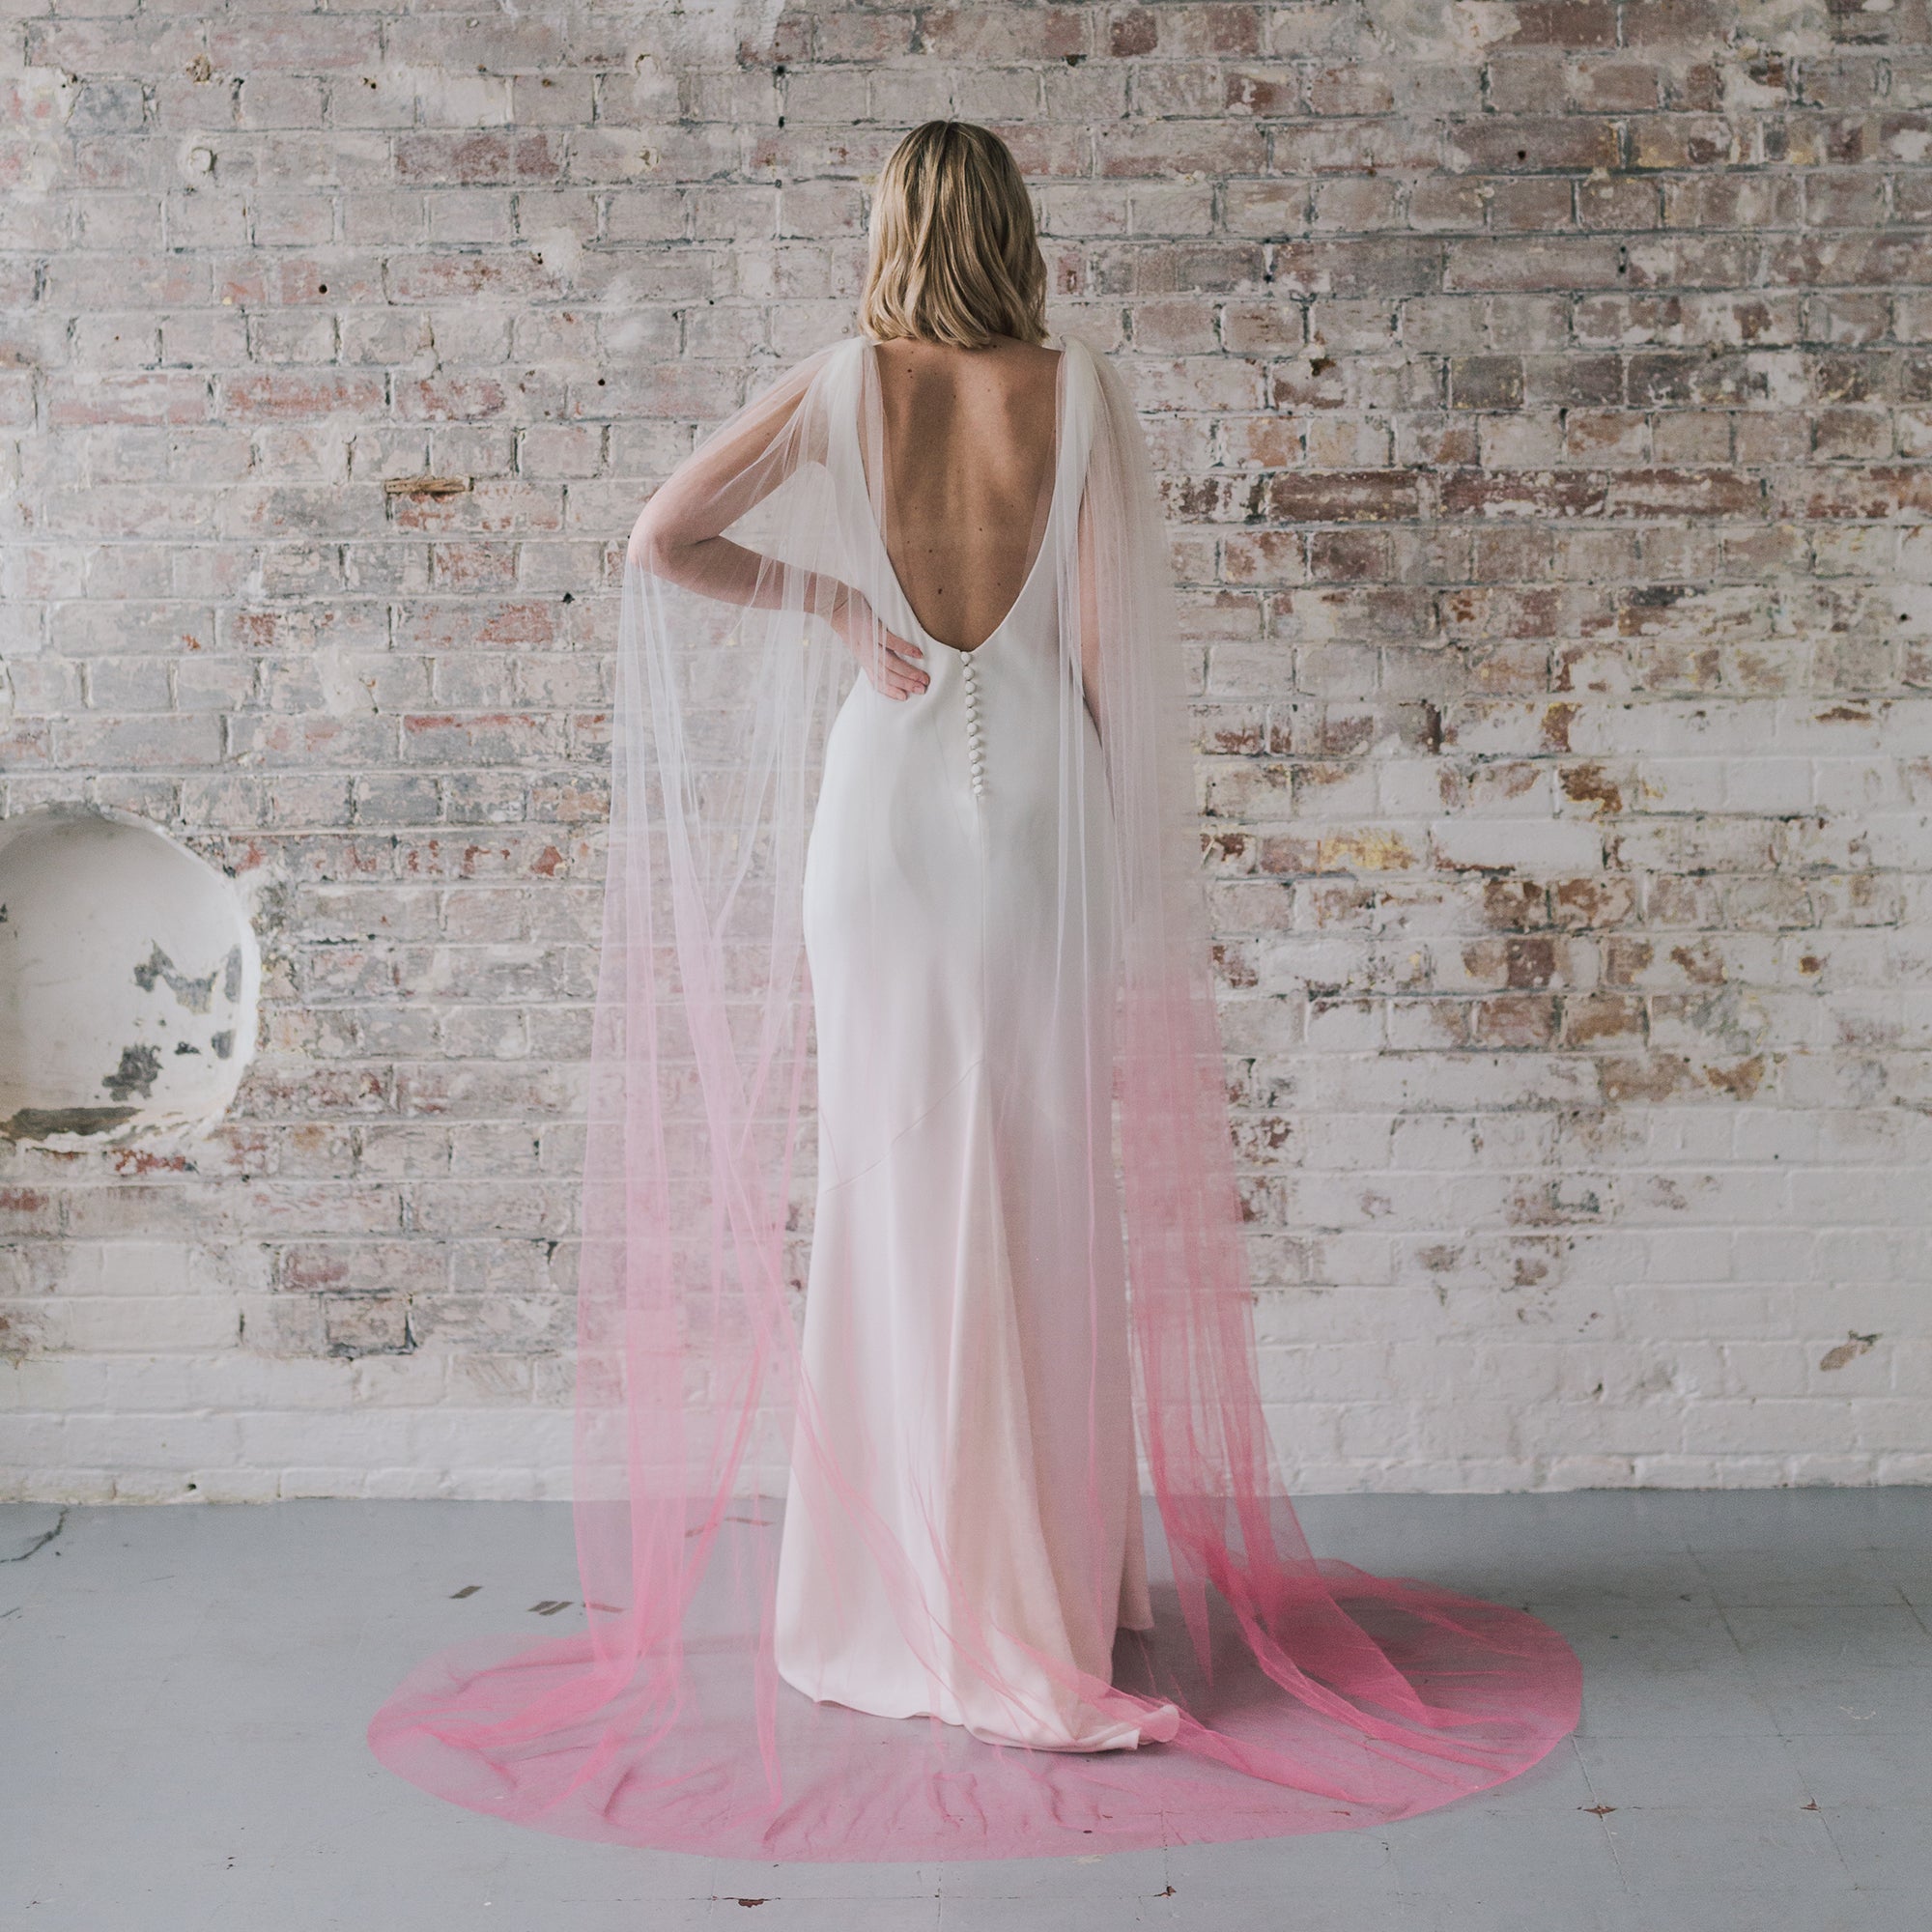 Ombre Dreams Dip Dye Bridal Cape Crown And Glory